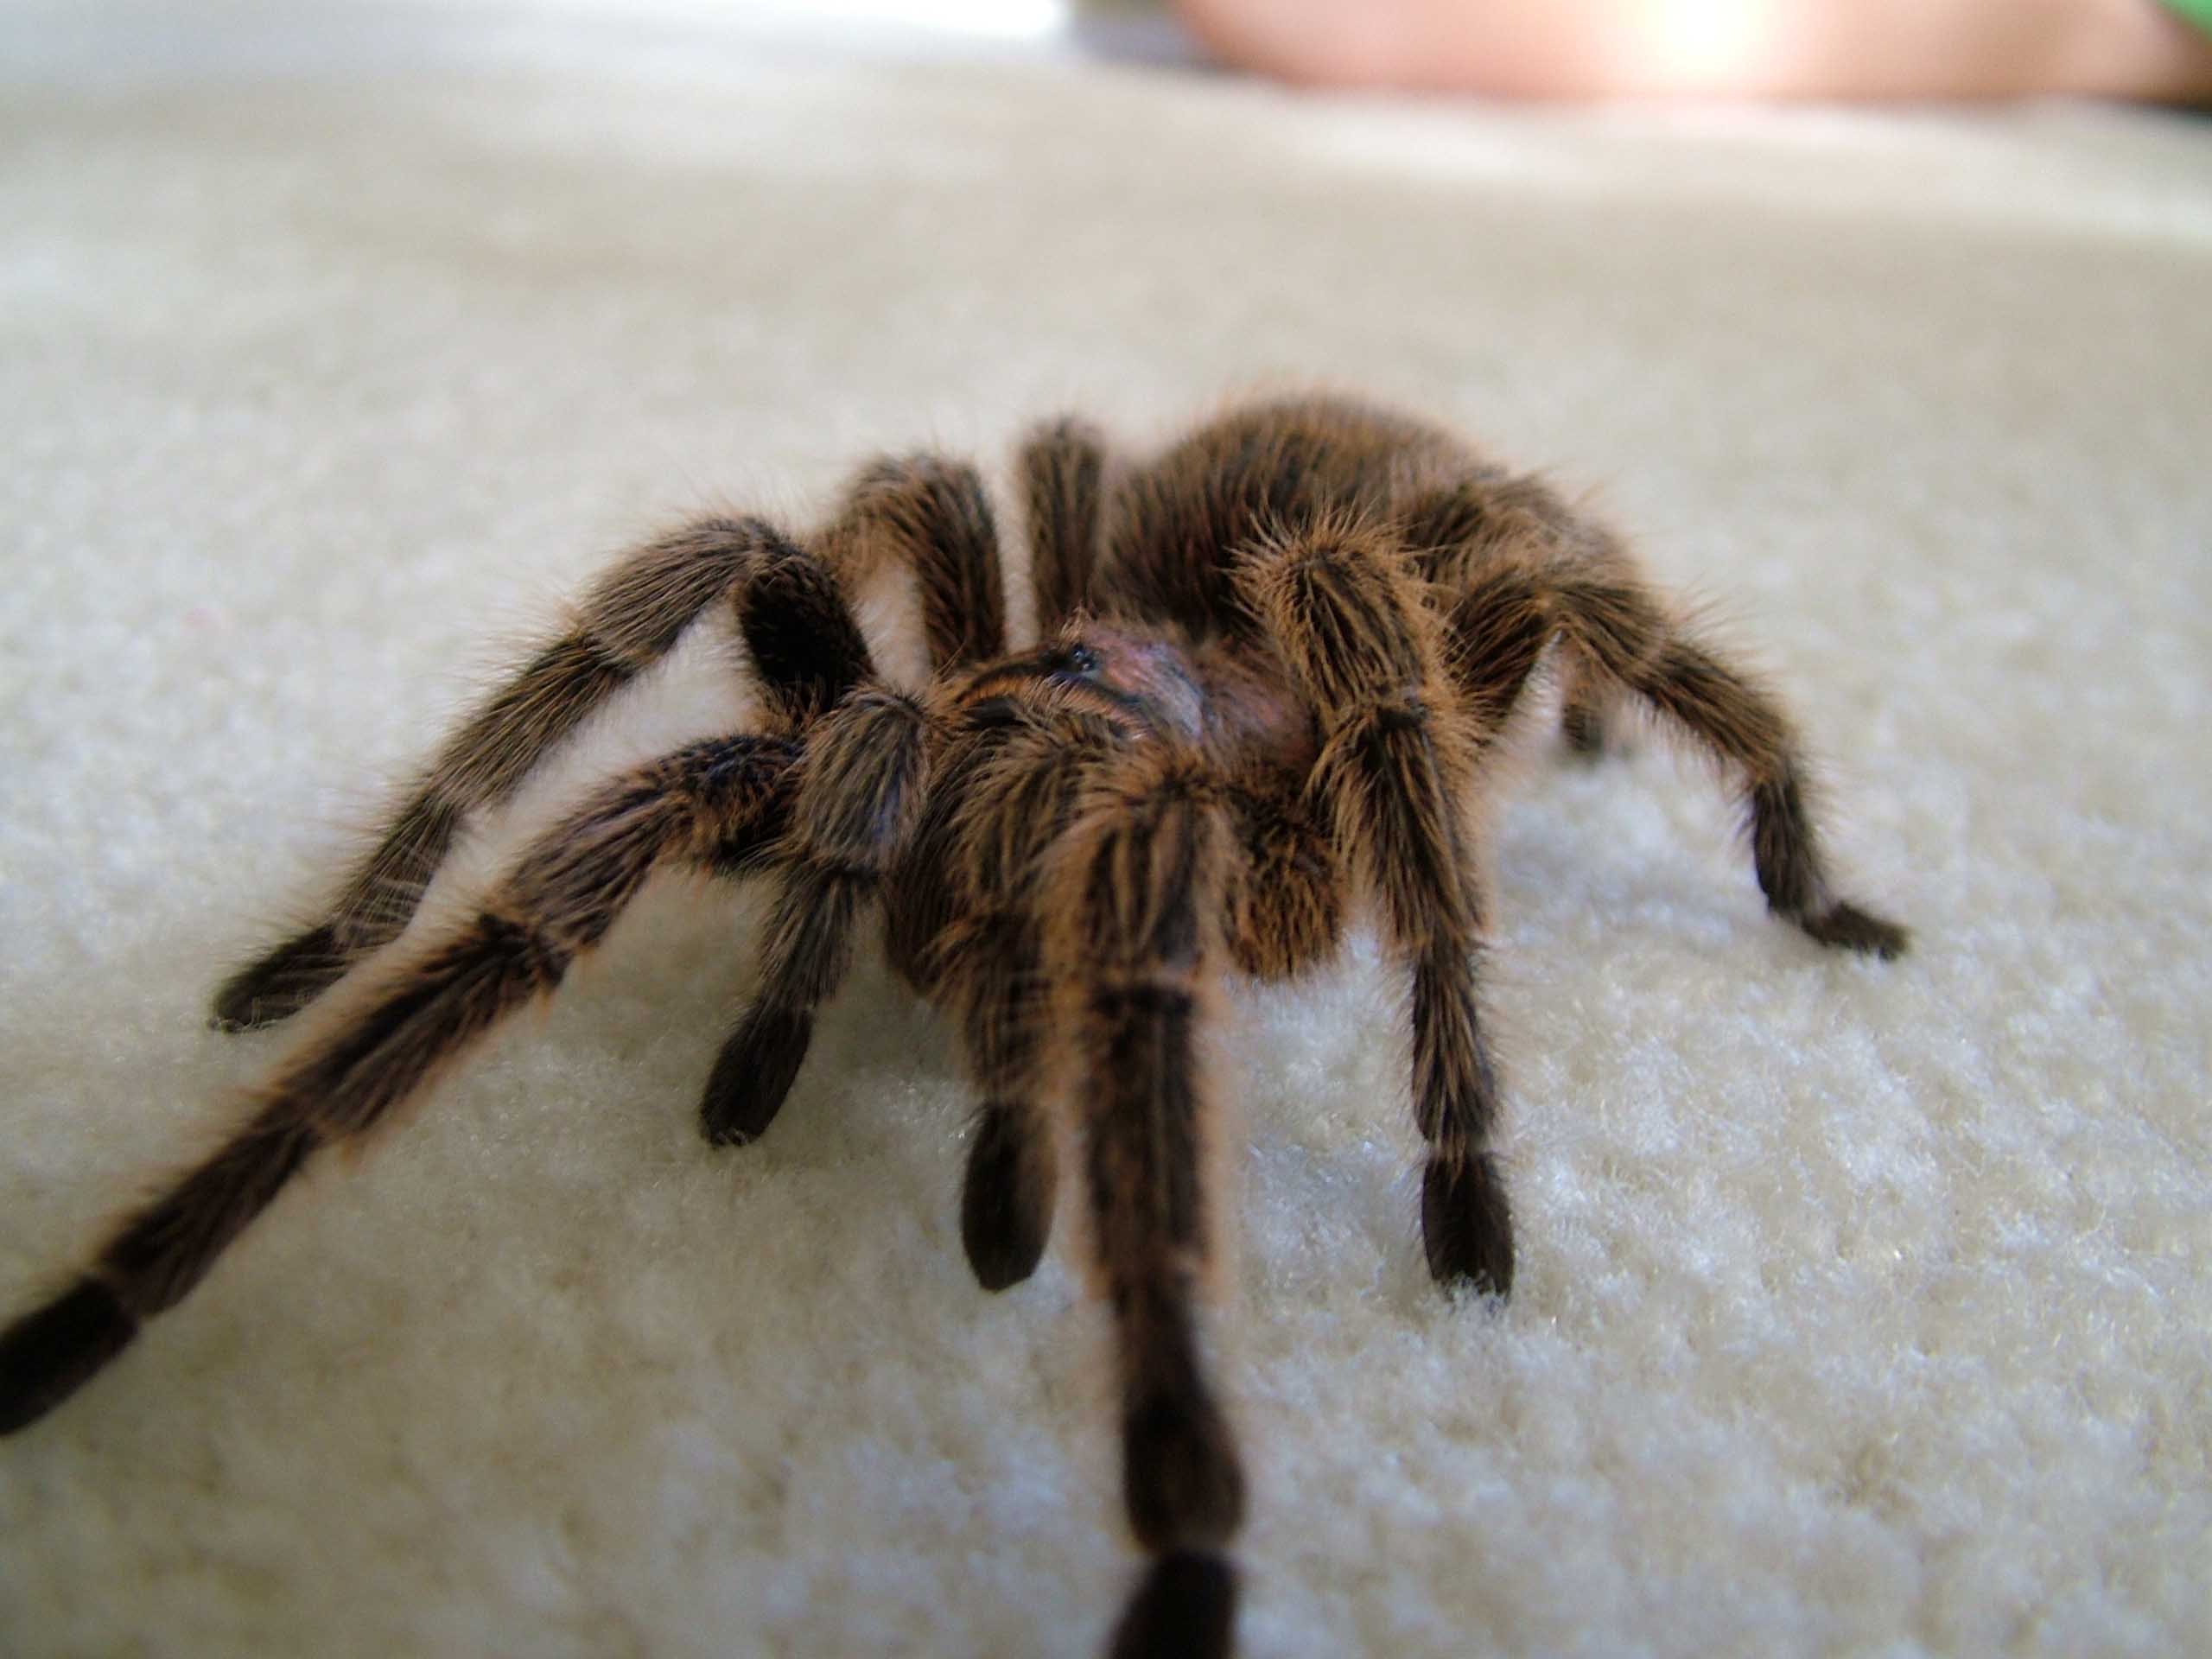 Scary Spider Moving HD Wallpaper Daily Background In